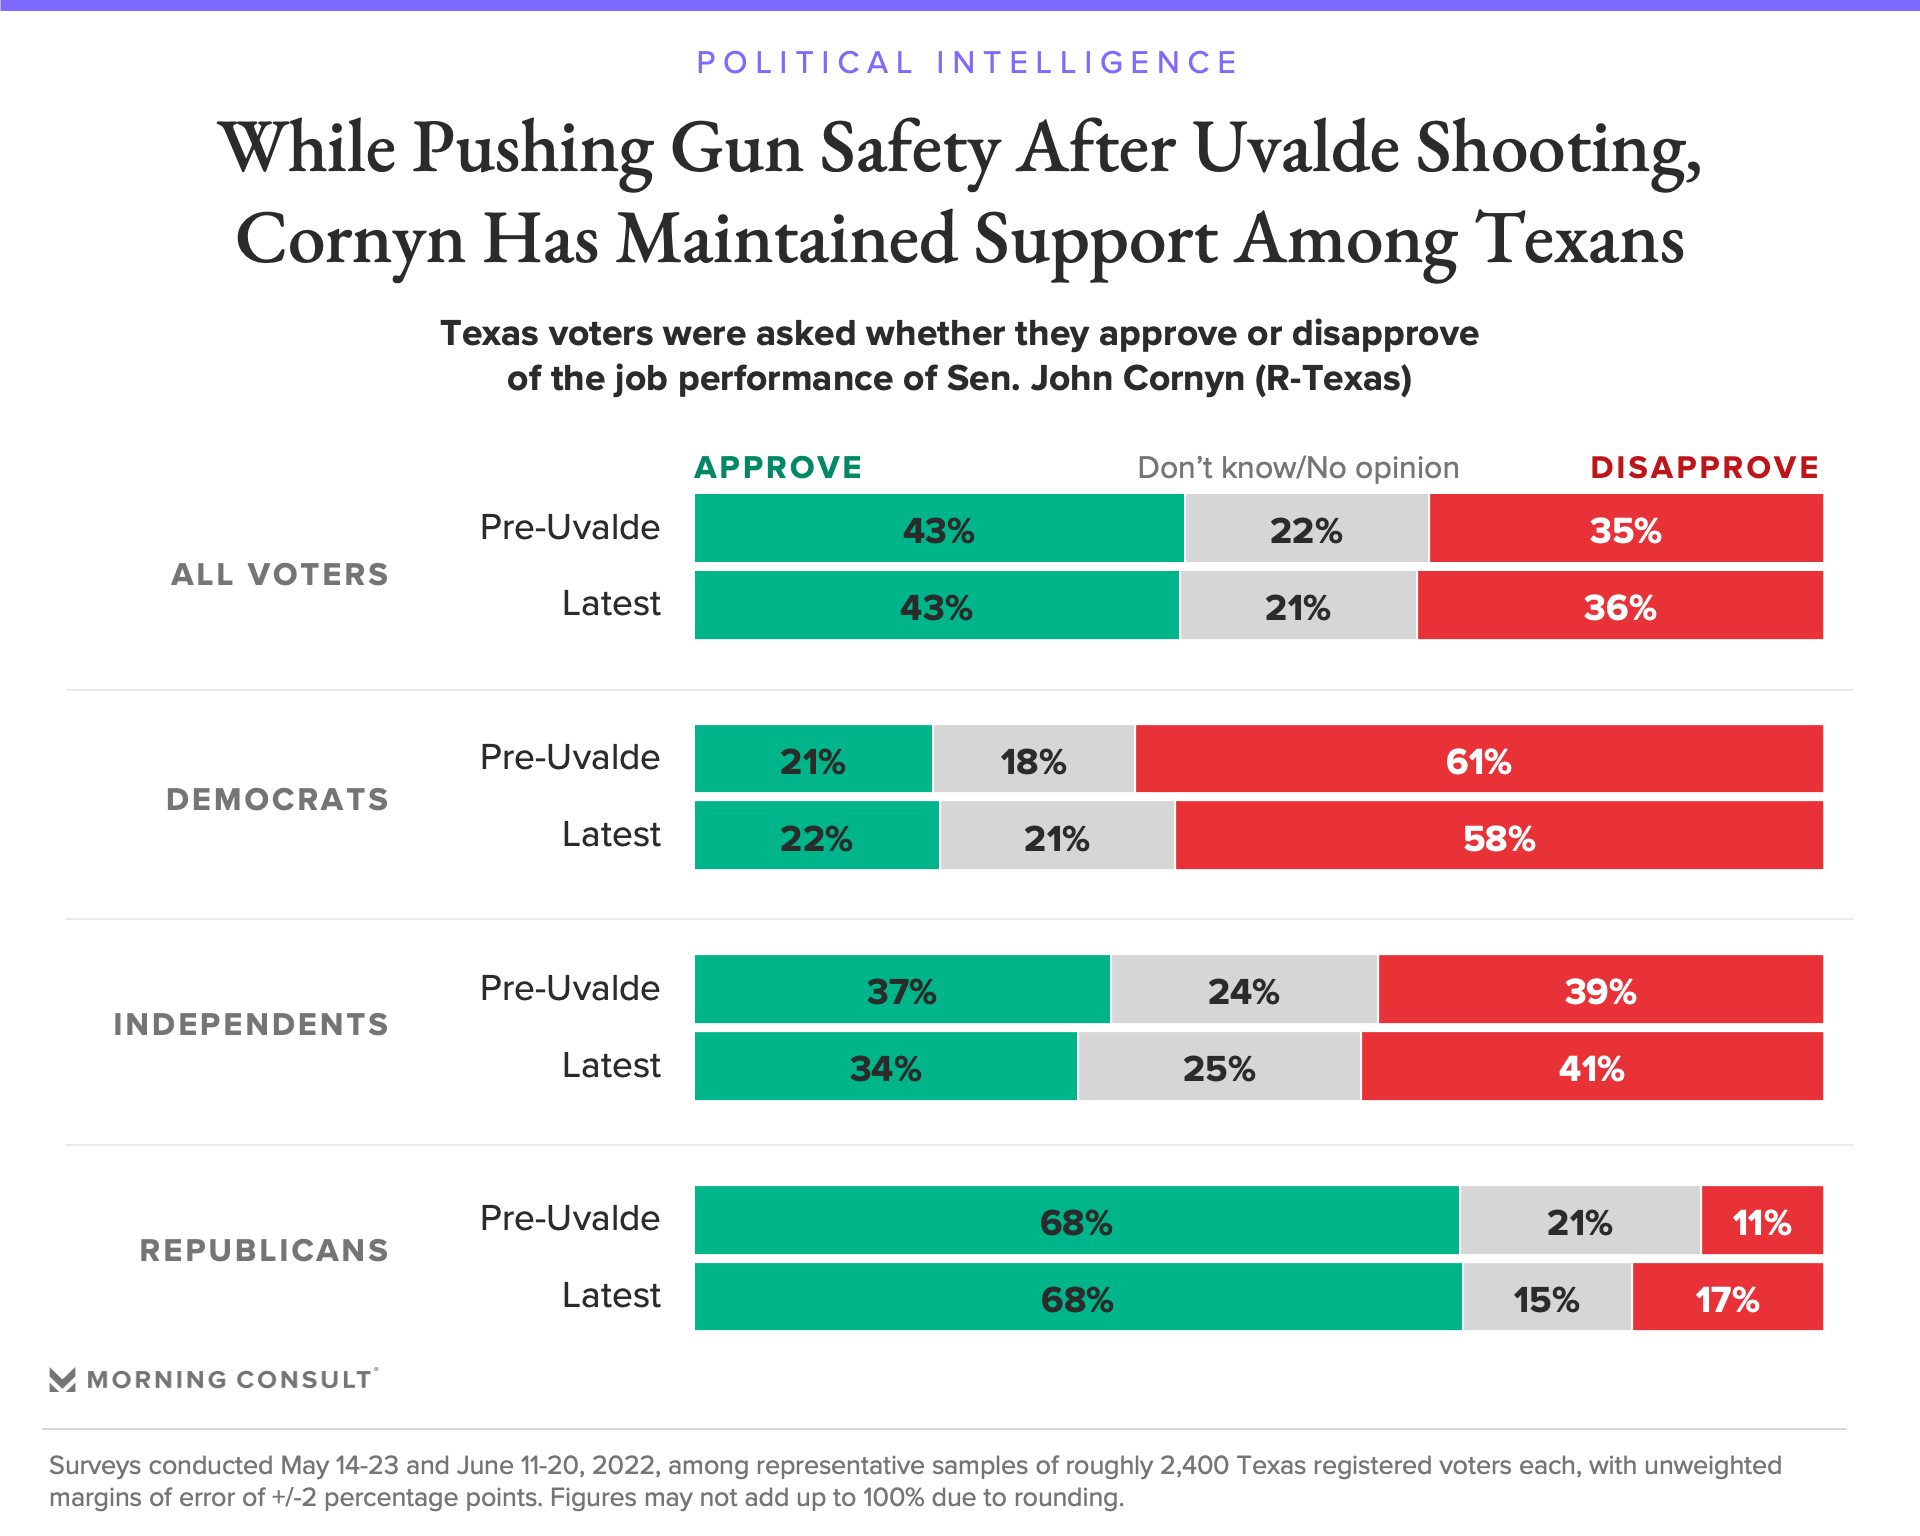 While pushing for gun safety after the Uvalde shooting, Cornyn has maintained support